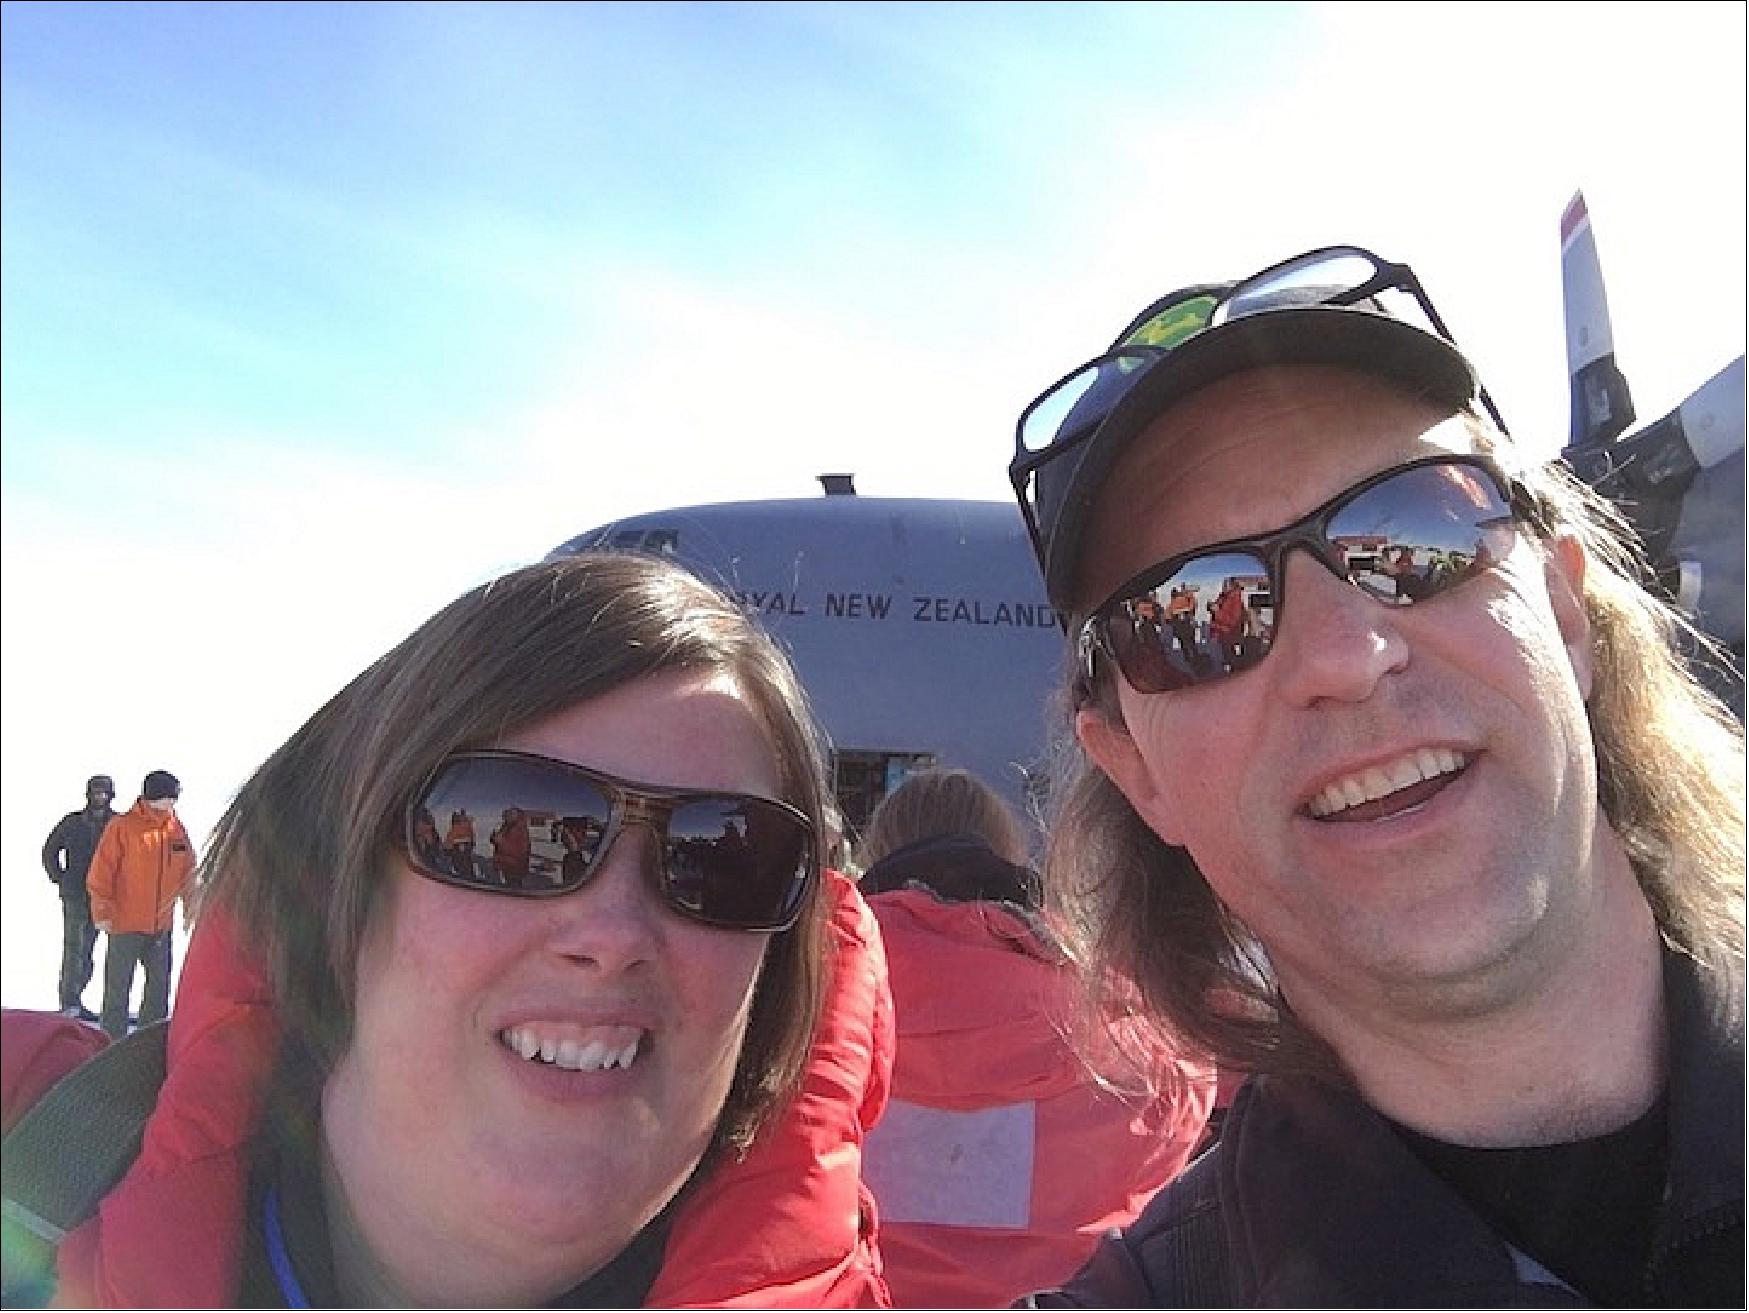 Figure 77: Kelly and Tom on the ice runway at McMurdo Station, Antarctica (image credit: Tom Neumann) 88)